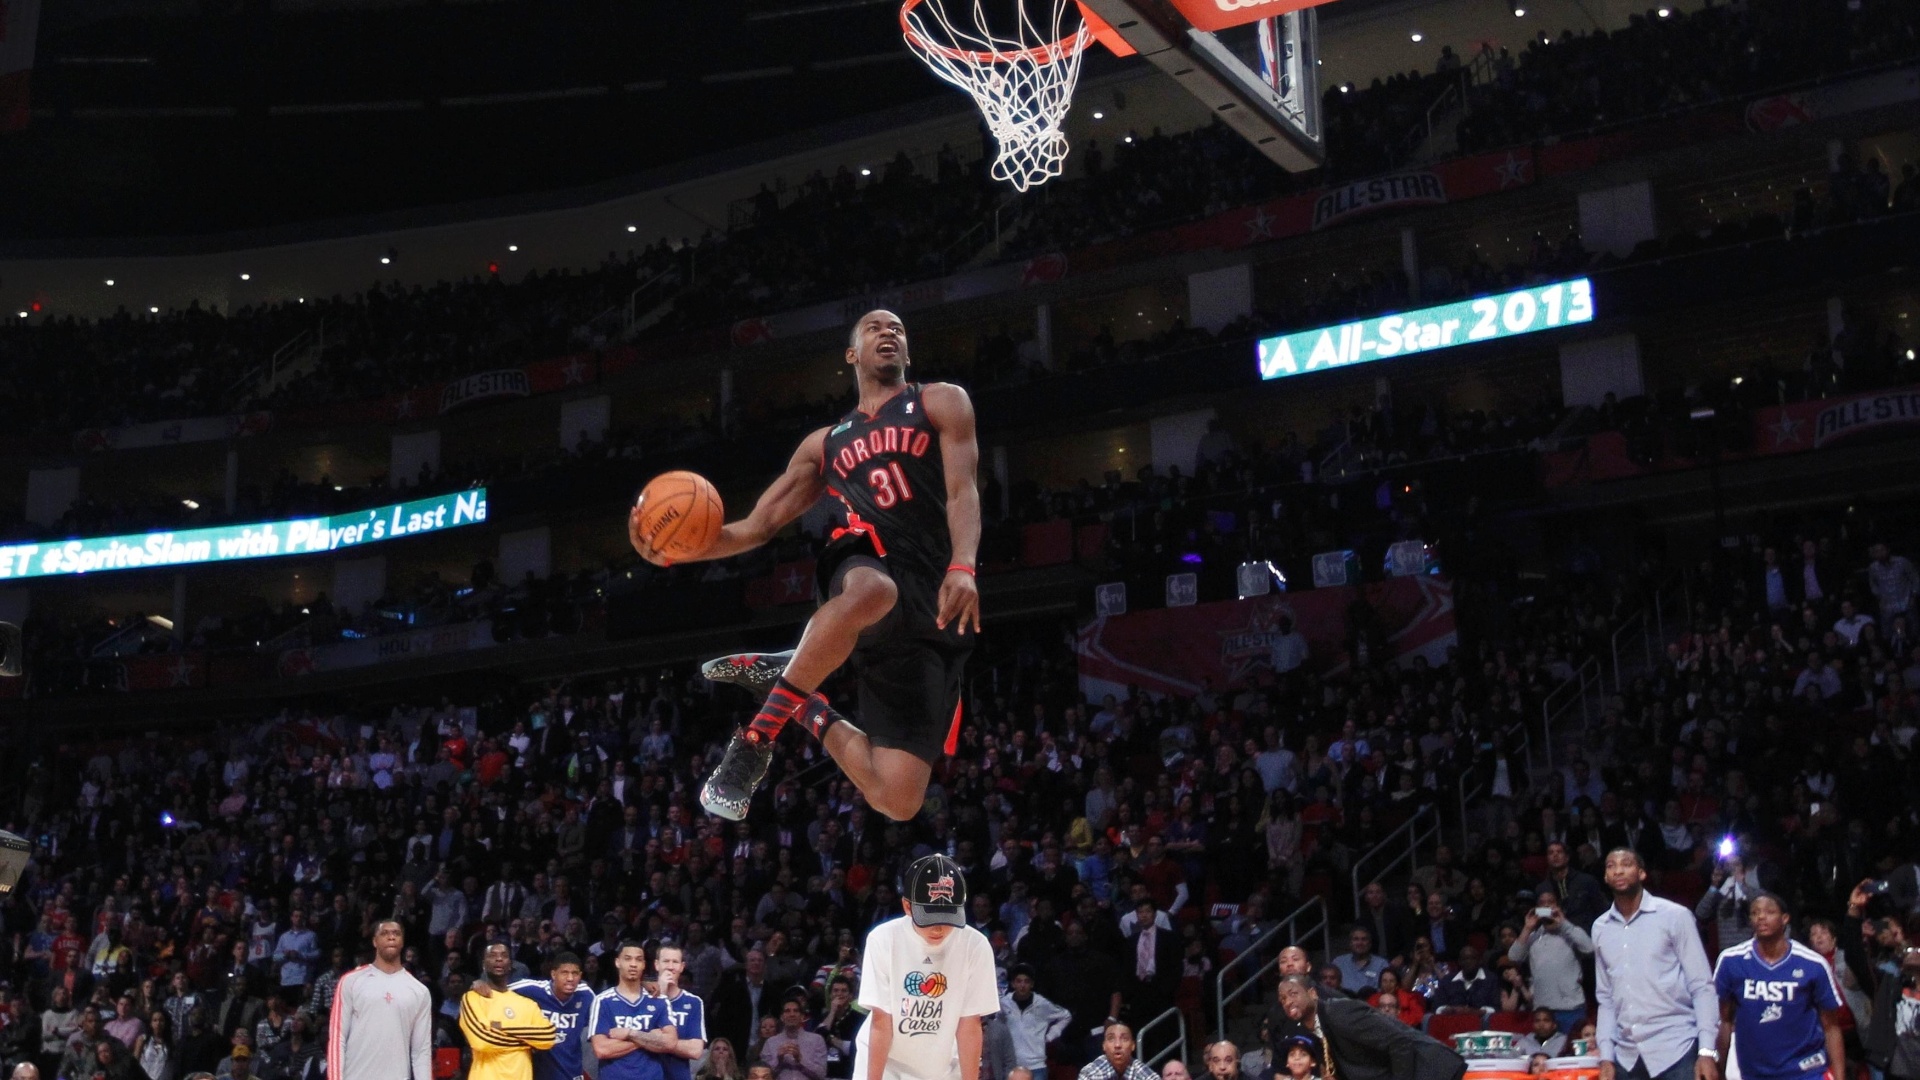 Terrence Ross wins dunk contest in memorable final